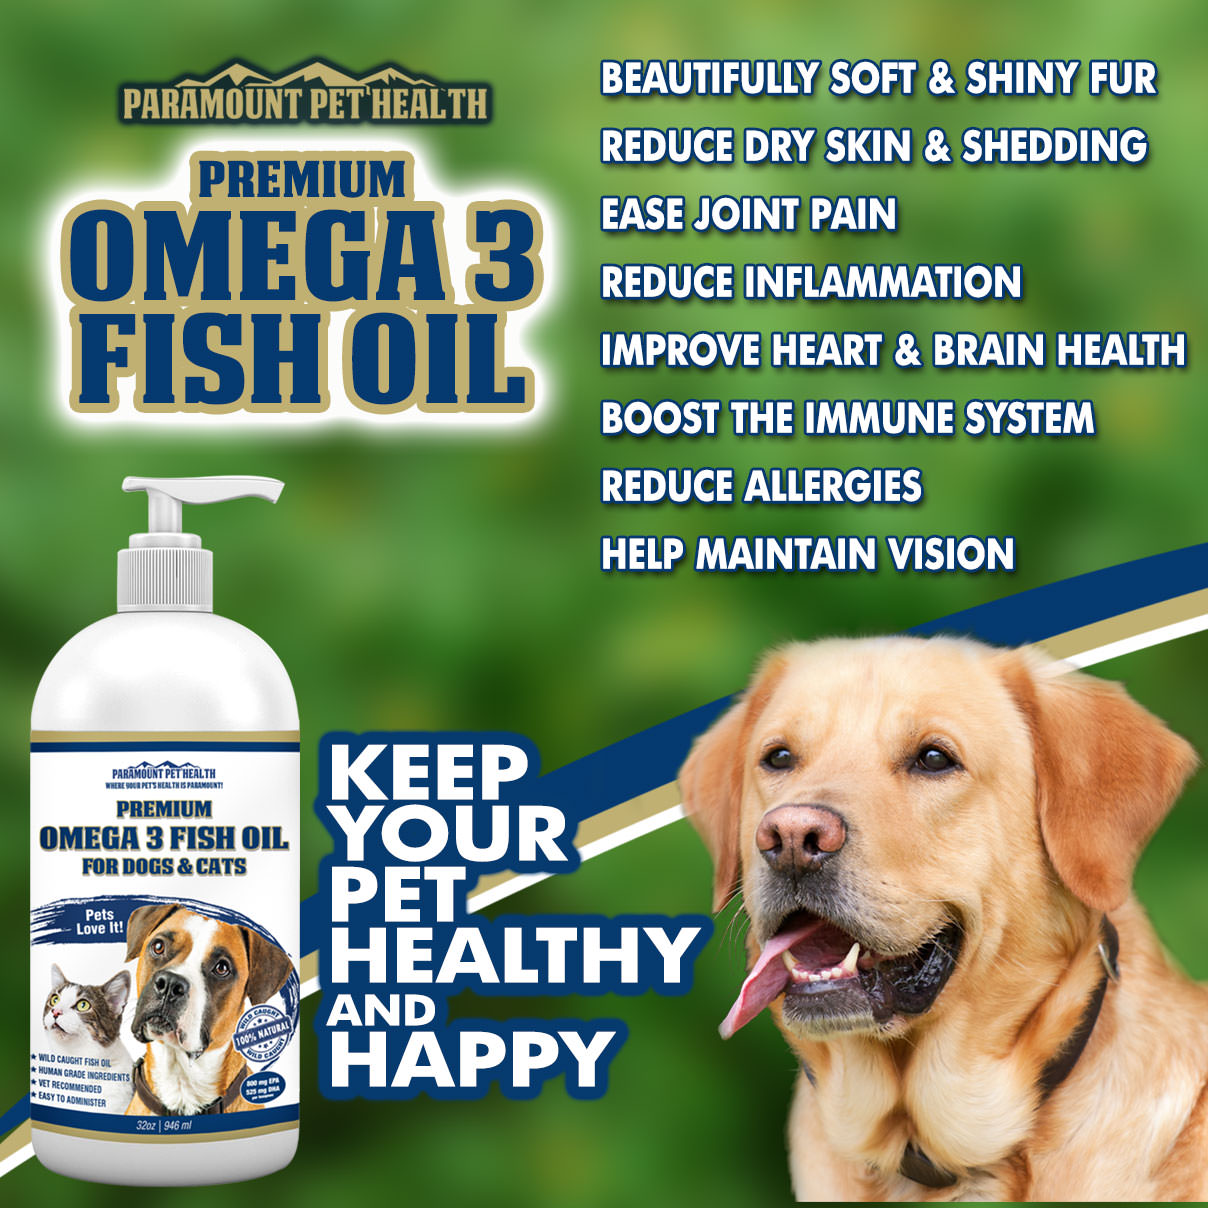 Omega 3 for Dogs and Cats Benefits